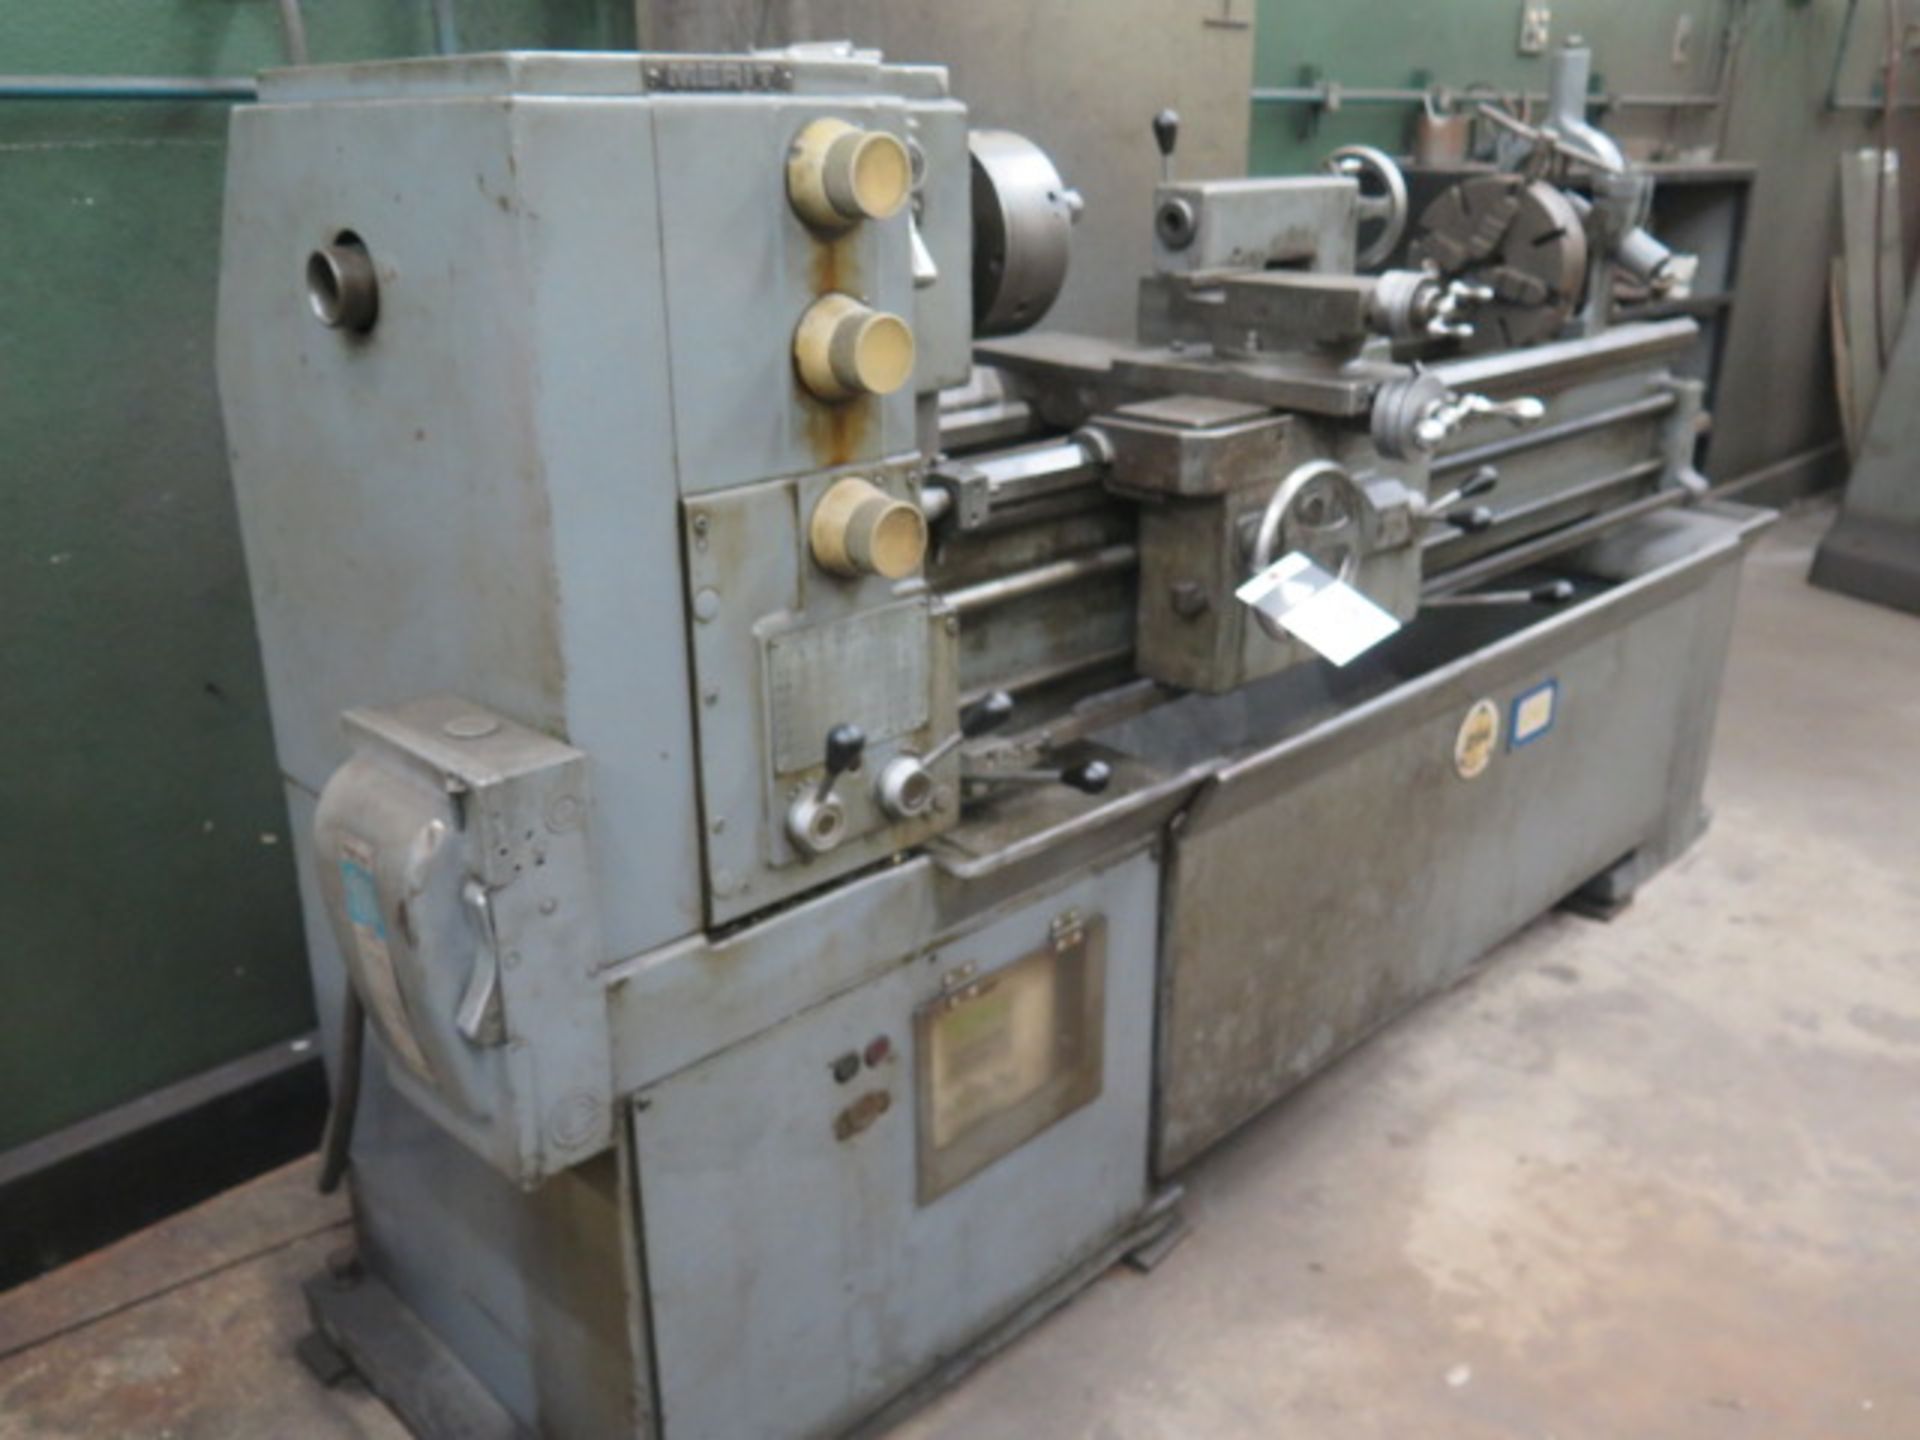 Merit 15" x 42" Lathe s/n 48752 w/ 30-1800 RPM, Inch Threading, Tailstock, Steady Rest, SOLD AS IS - Image 2 of 10